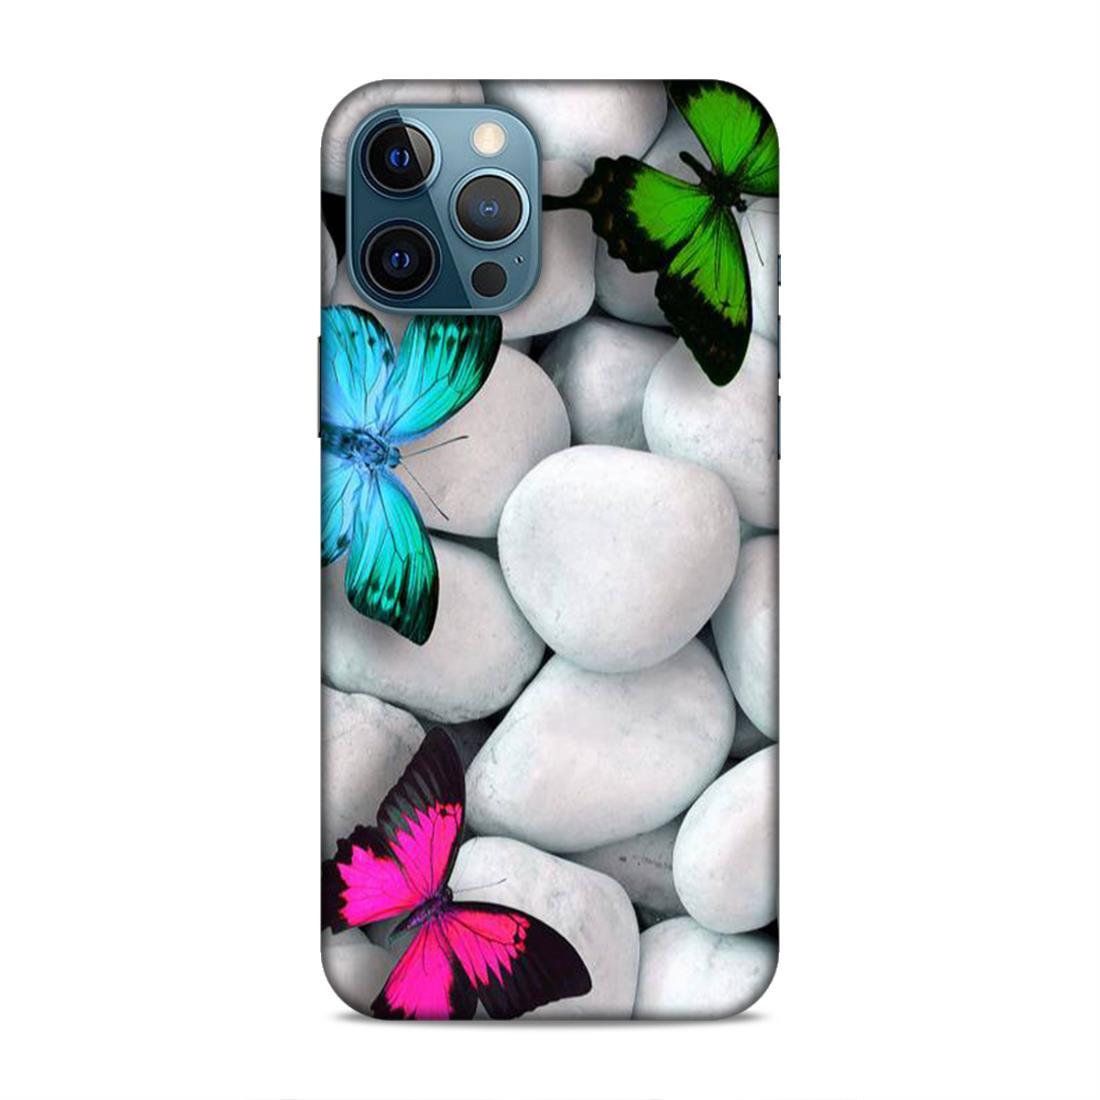 White Stone iPhone 12 Pro Max Phone Case Cover